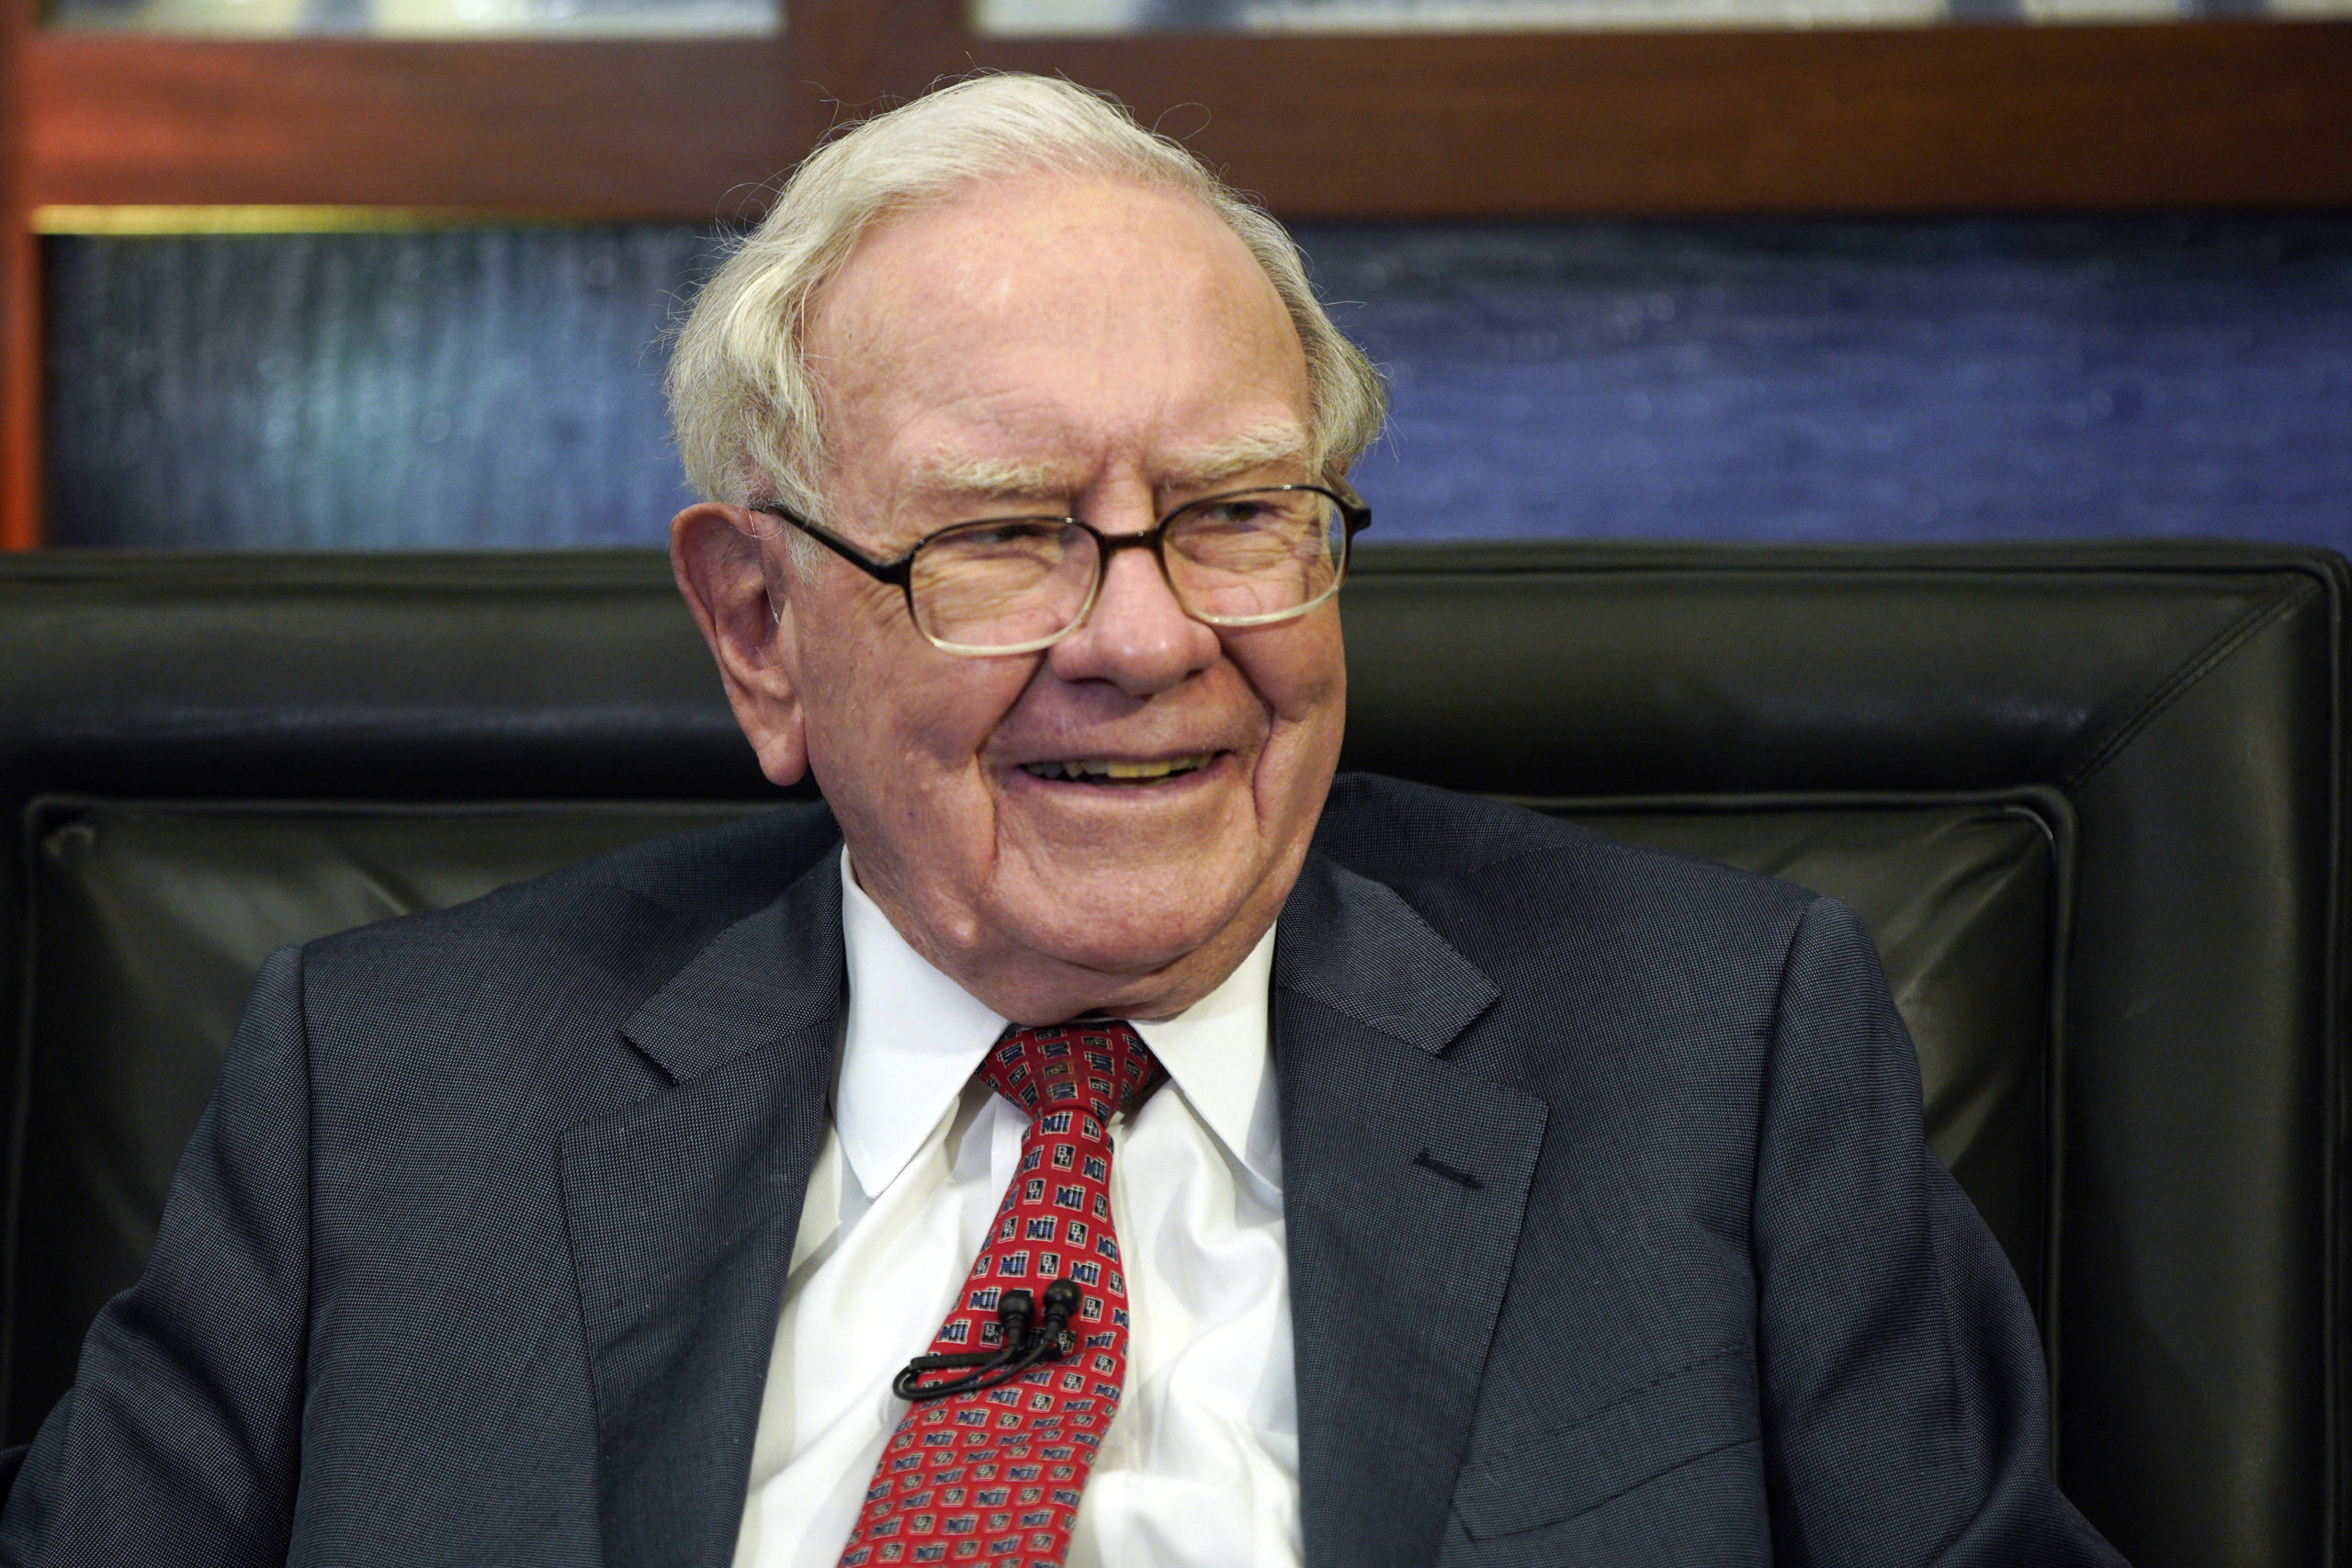 Berkshire Hathaway CEO Warren Buffett smiles during an interview in Omaha, Neb., in May 2018. After years of steady payments, Buffett has given billions in donations to the Bill & Melinda Gates Foundation and to other foundations connected to his family.